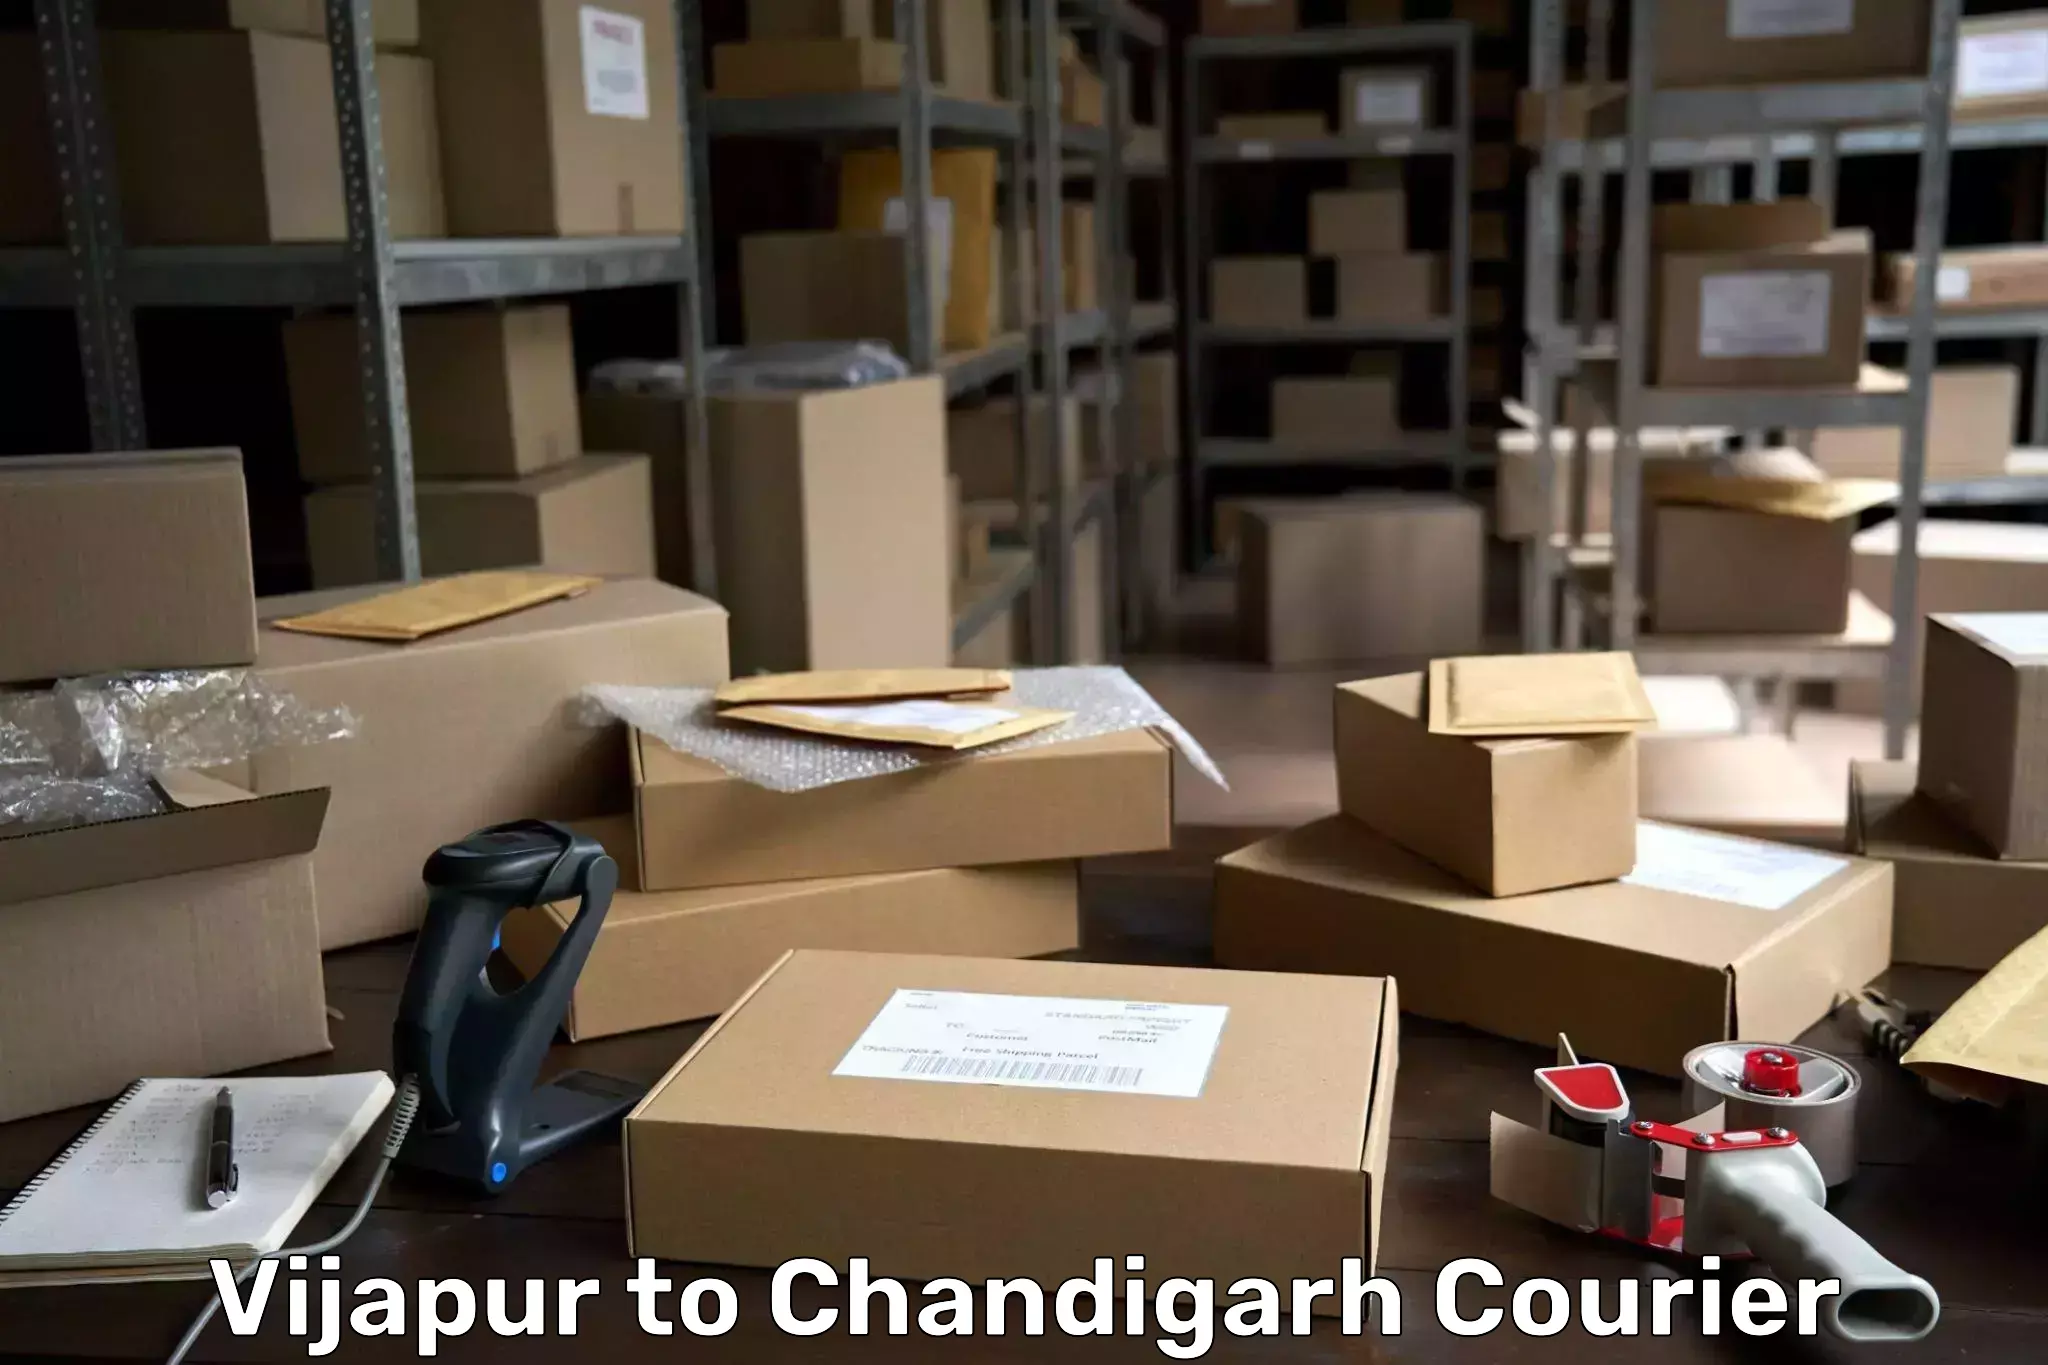 Global parcel delivery Vijapur to Chandigarh